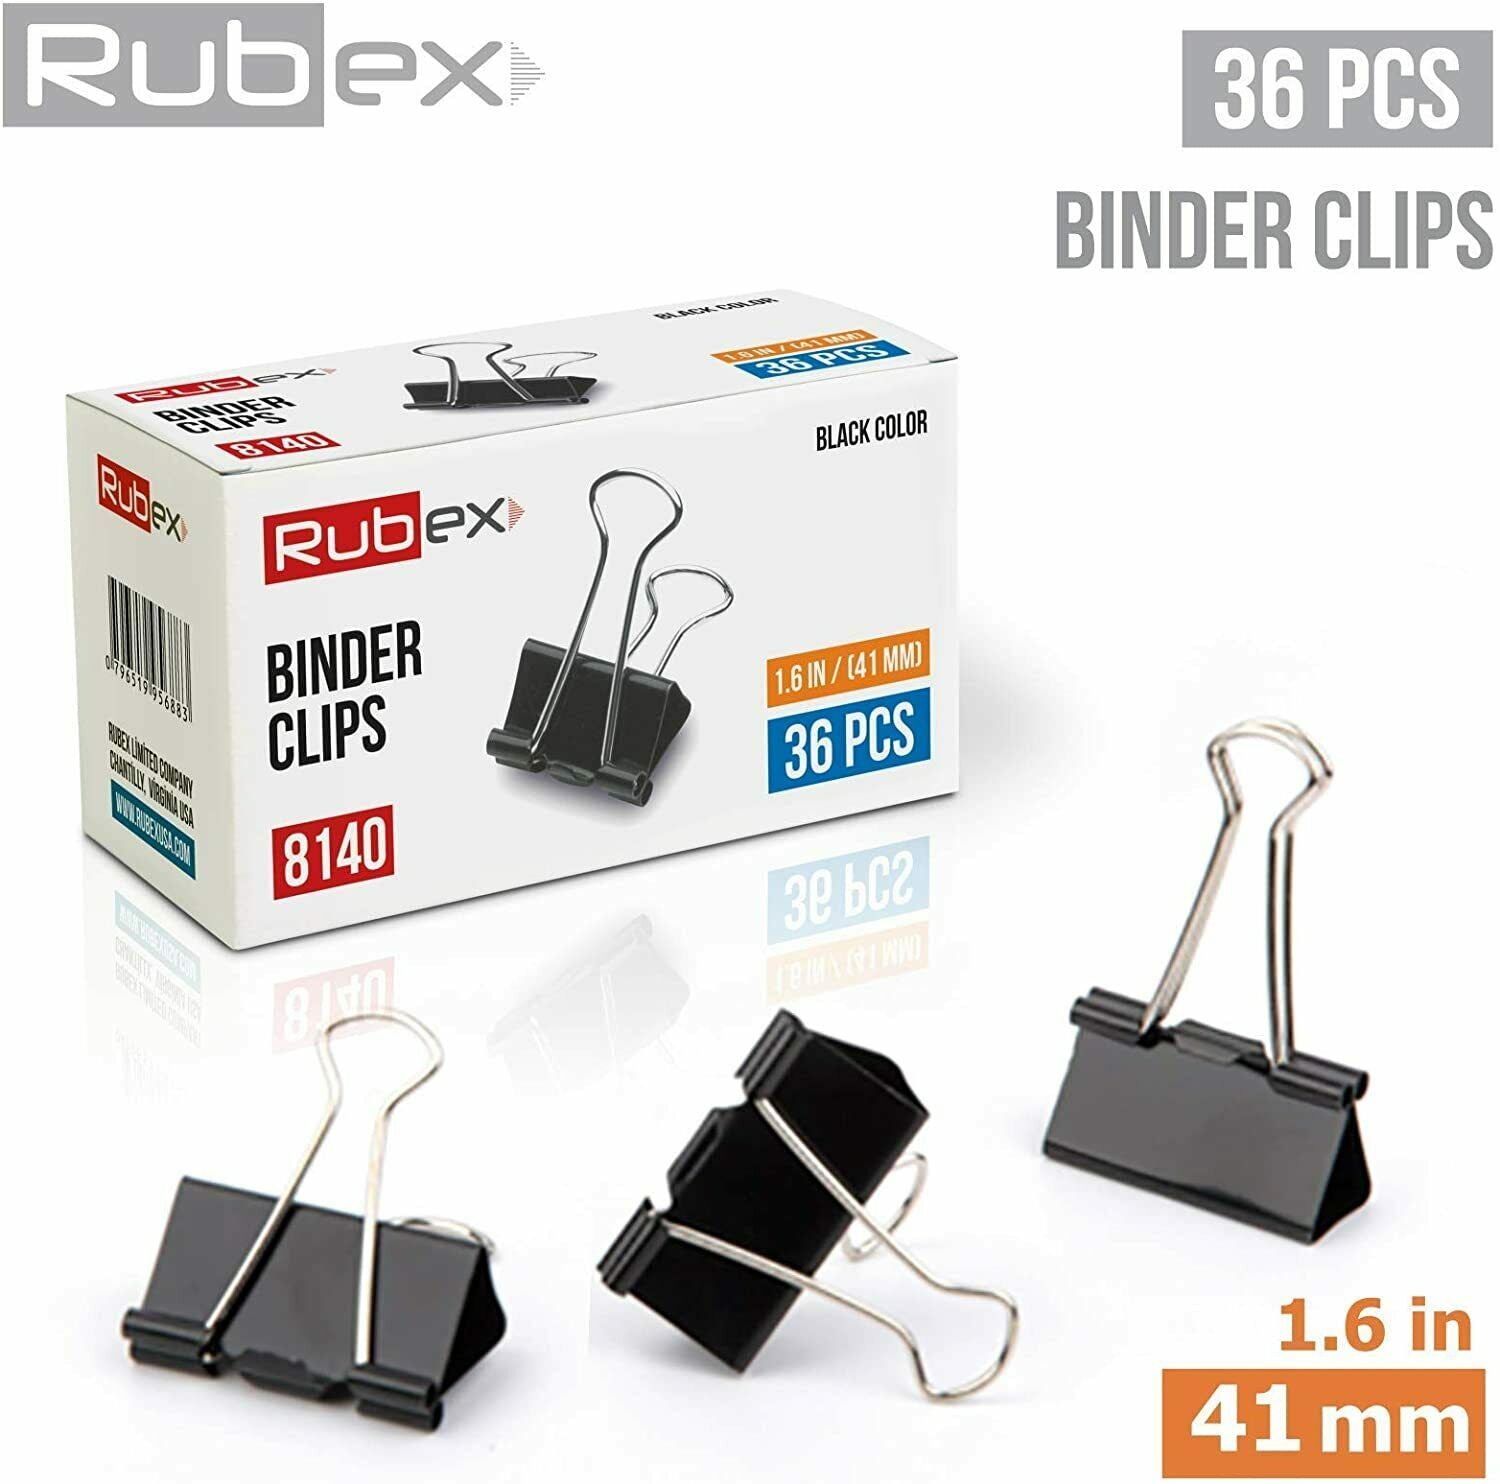 Rubex Binder Clips, Black Large Binder Clips, Jumbo Binder Clips, 1.6 Inch  Paper Binder Clips, Big Metal Paper Clamps for Notebooks, Envelopes, Papers